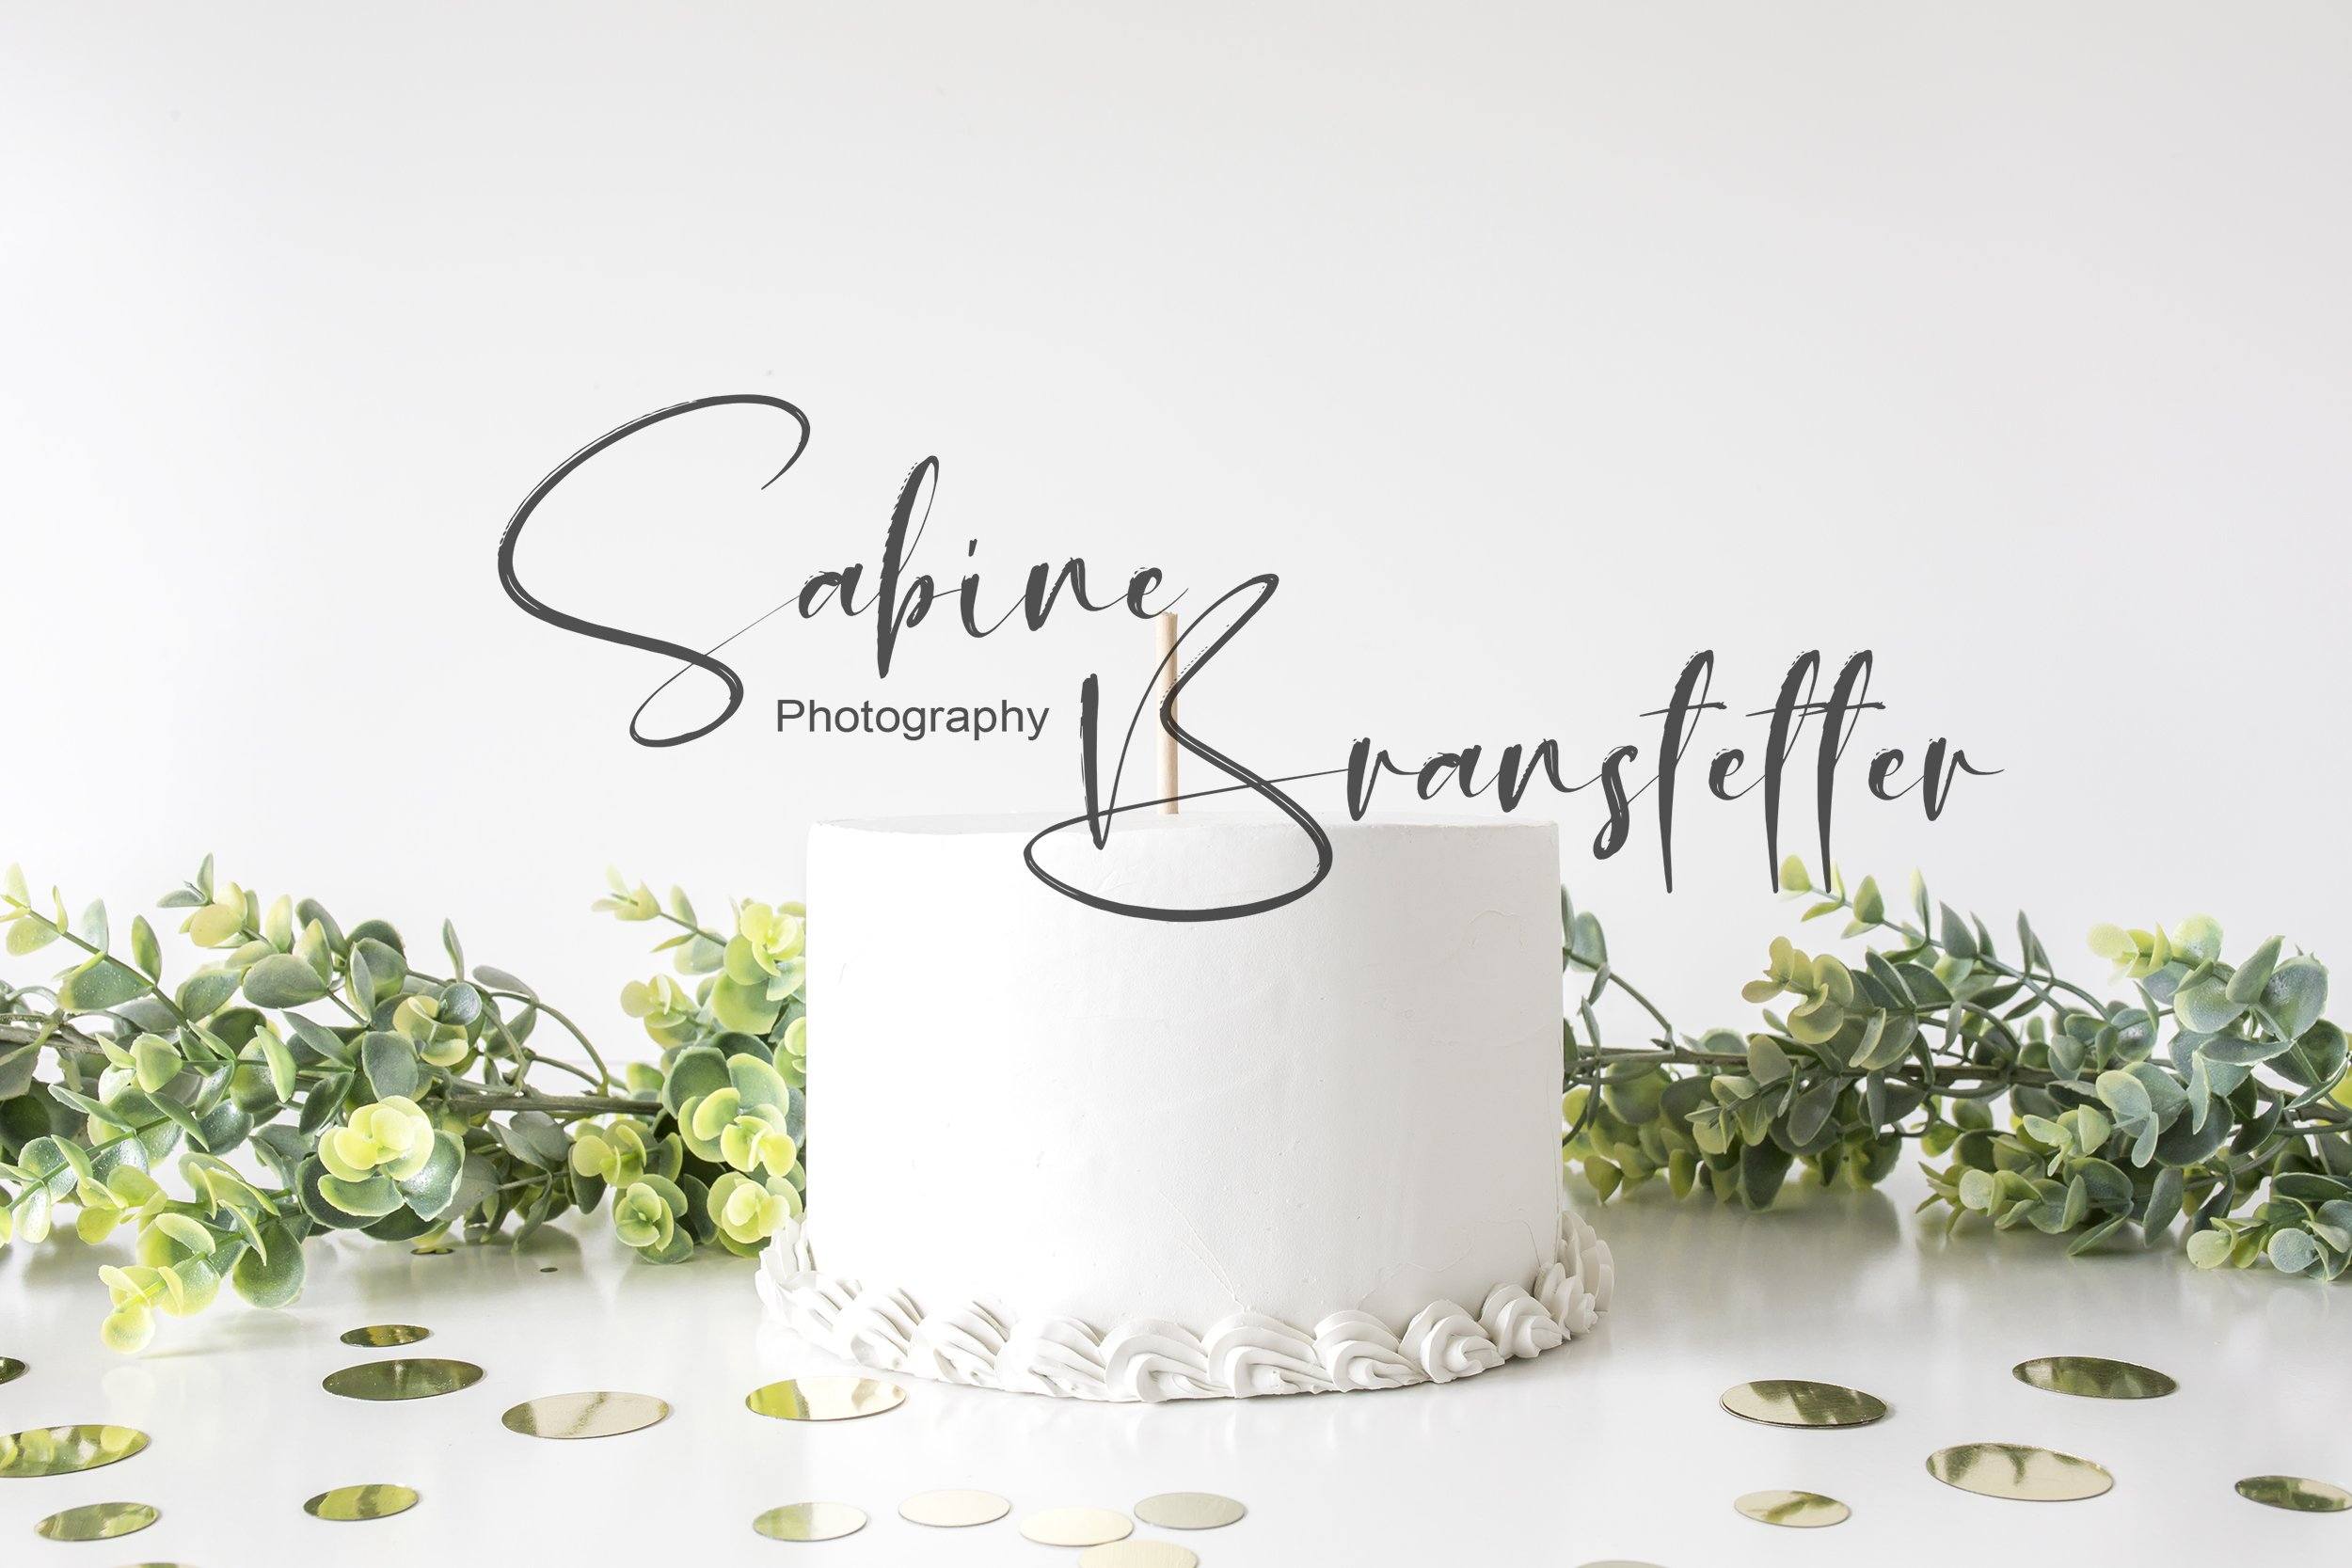 Download Styled Stock Photography Sweetness Mockup Digital File White Neutral Birthday Wedding Cake With Topper Mockup So Fontsy